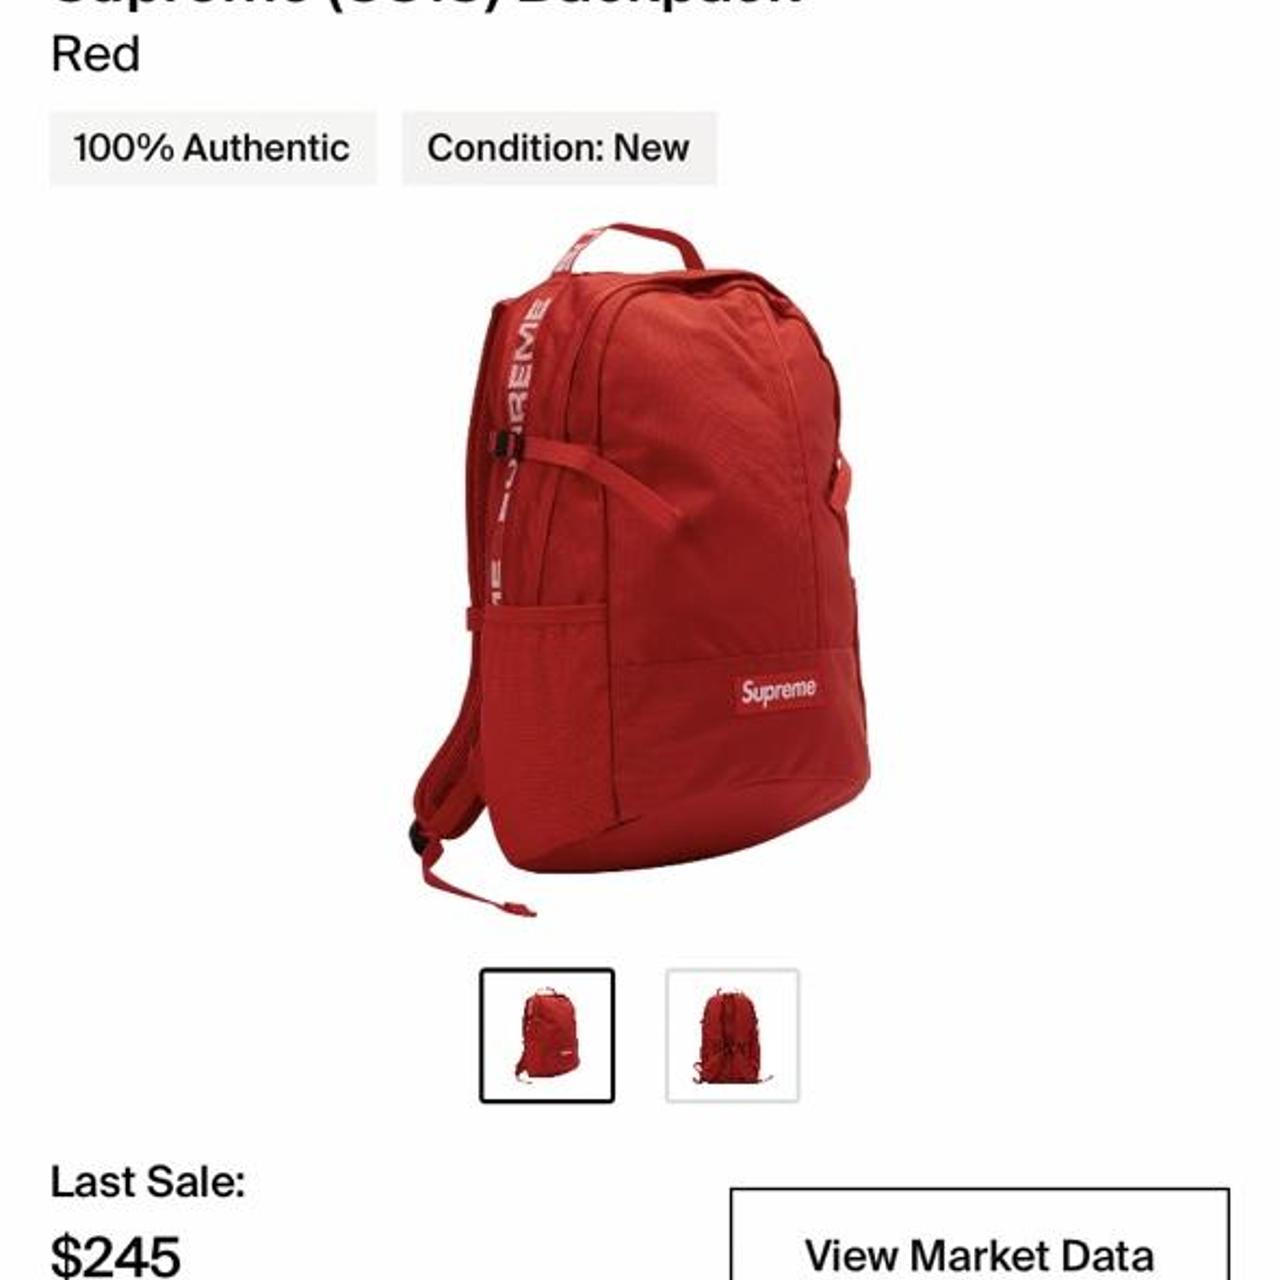 Dope red supreme backpack perfect for going to - Depop